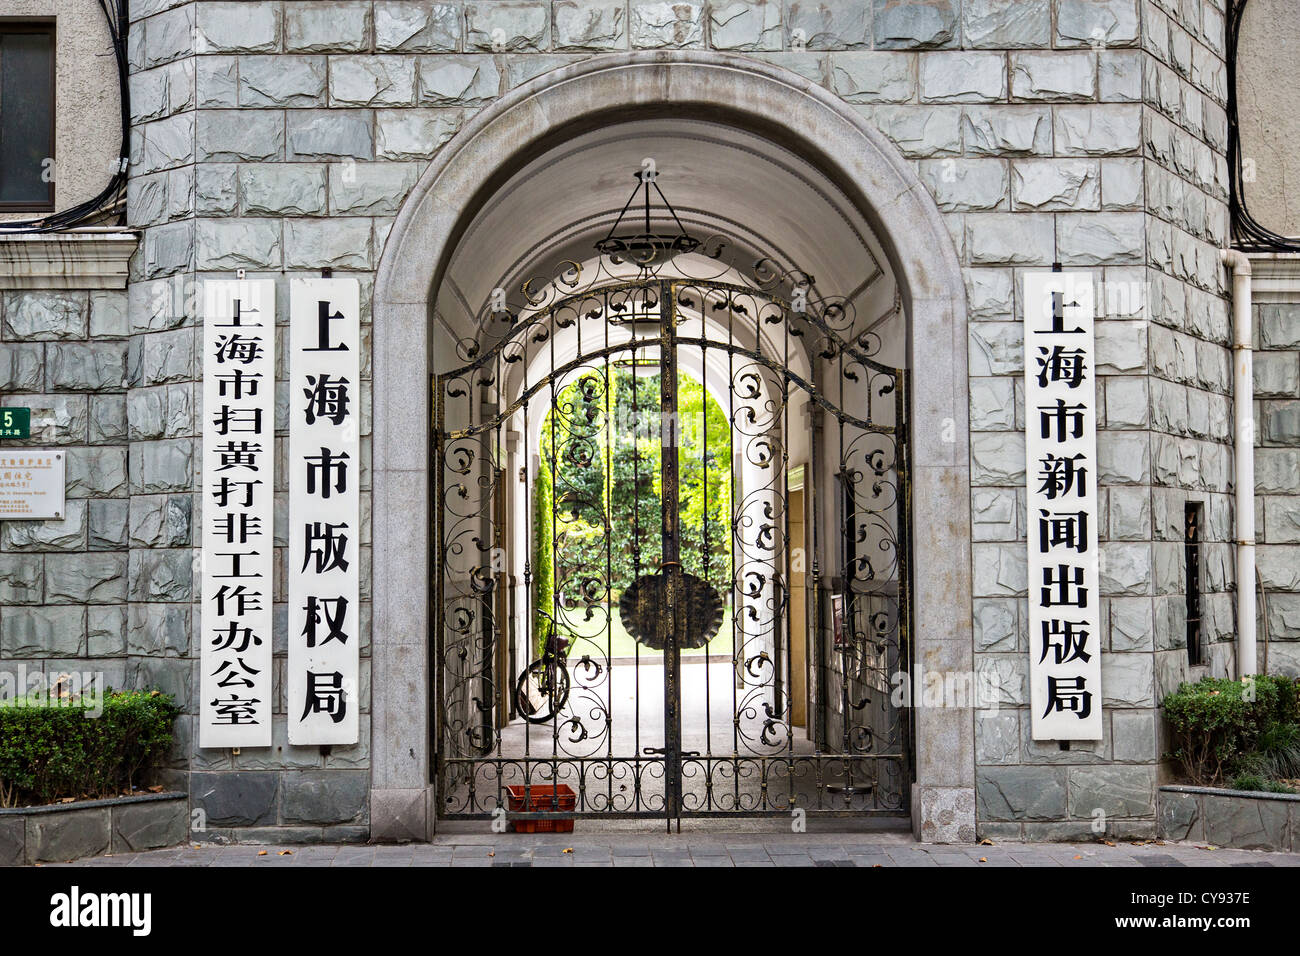 Chinese slogans on an old building in the French Concession of Shanghai, China Stock Photo